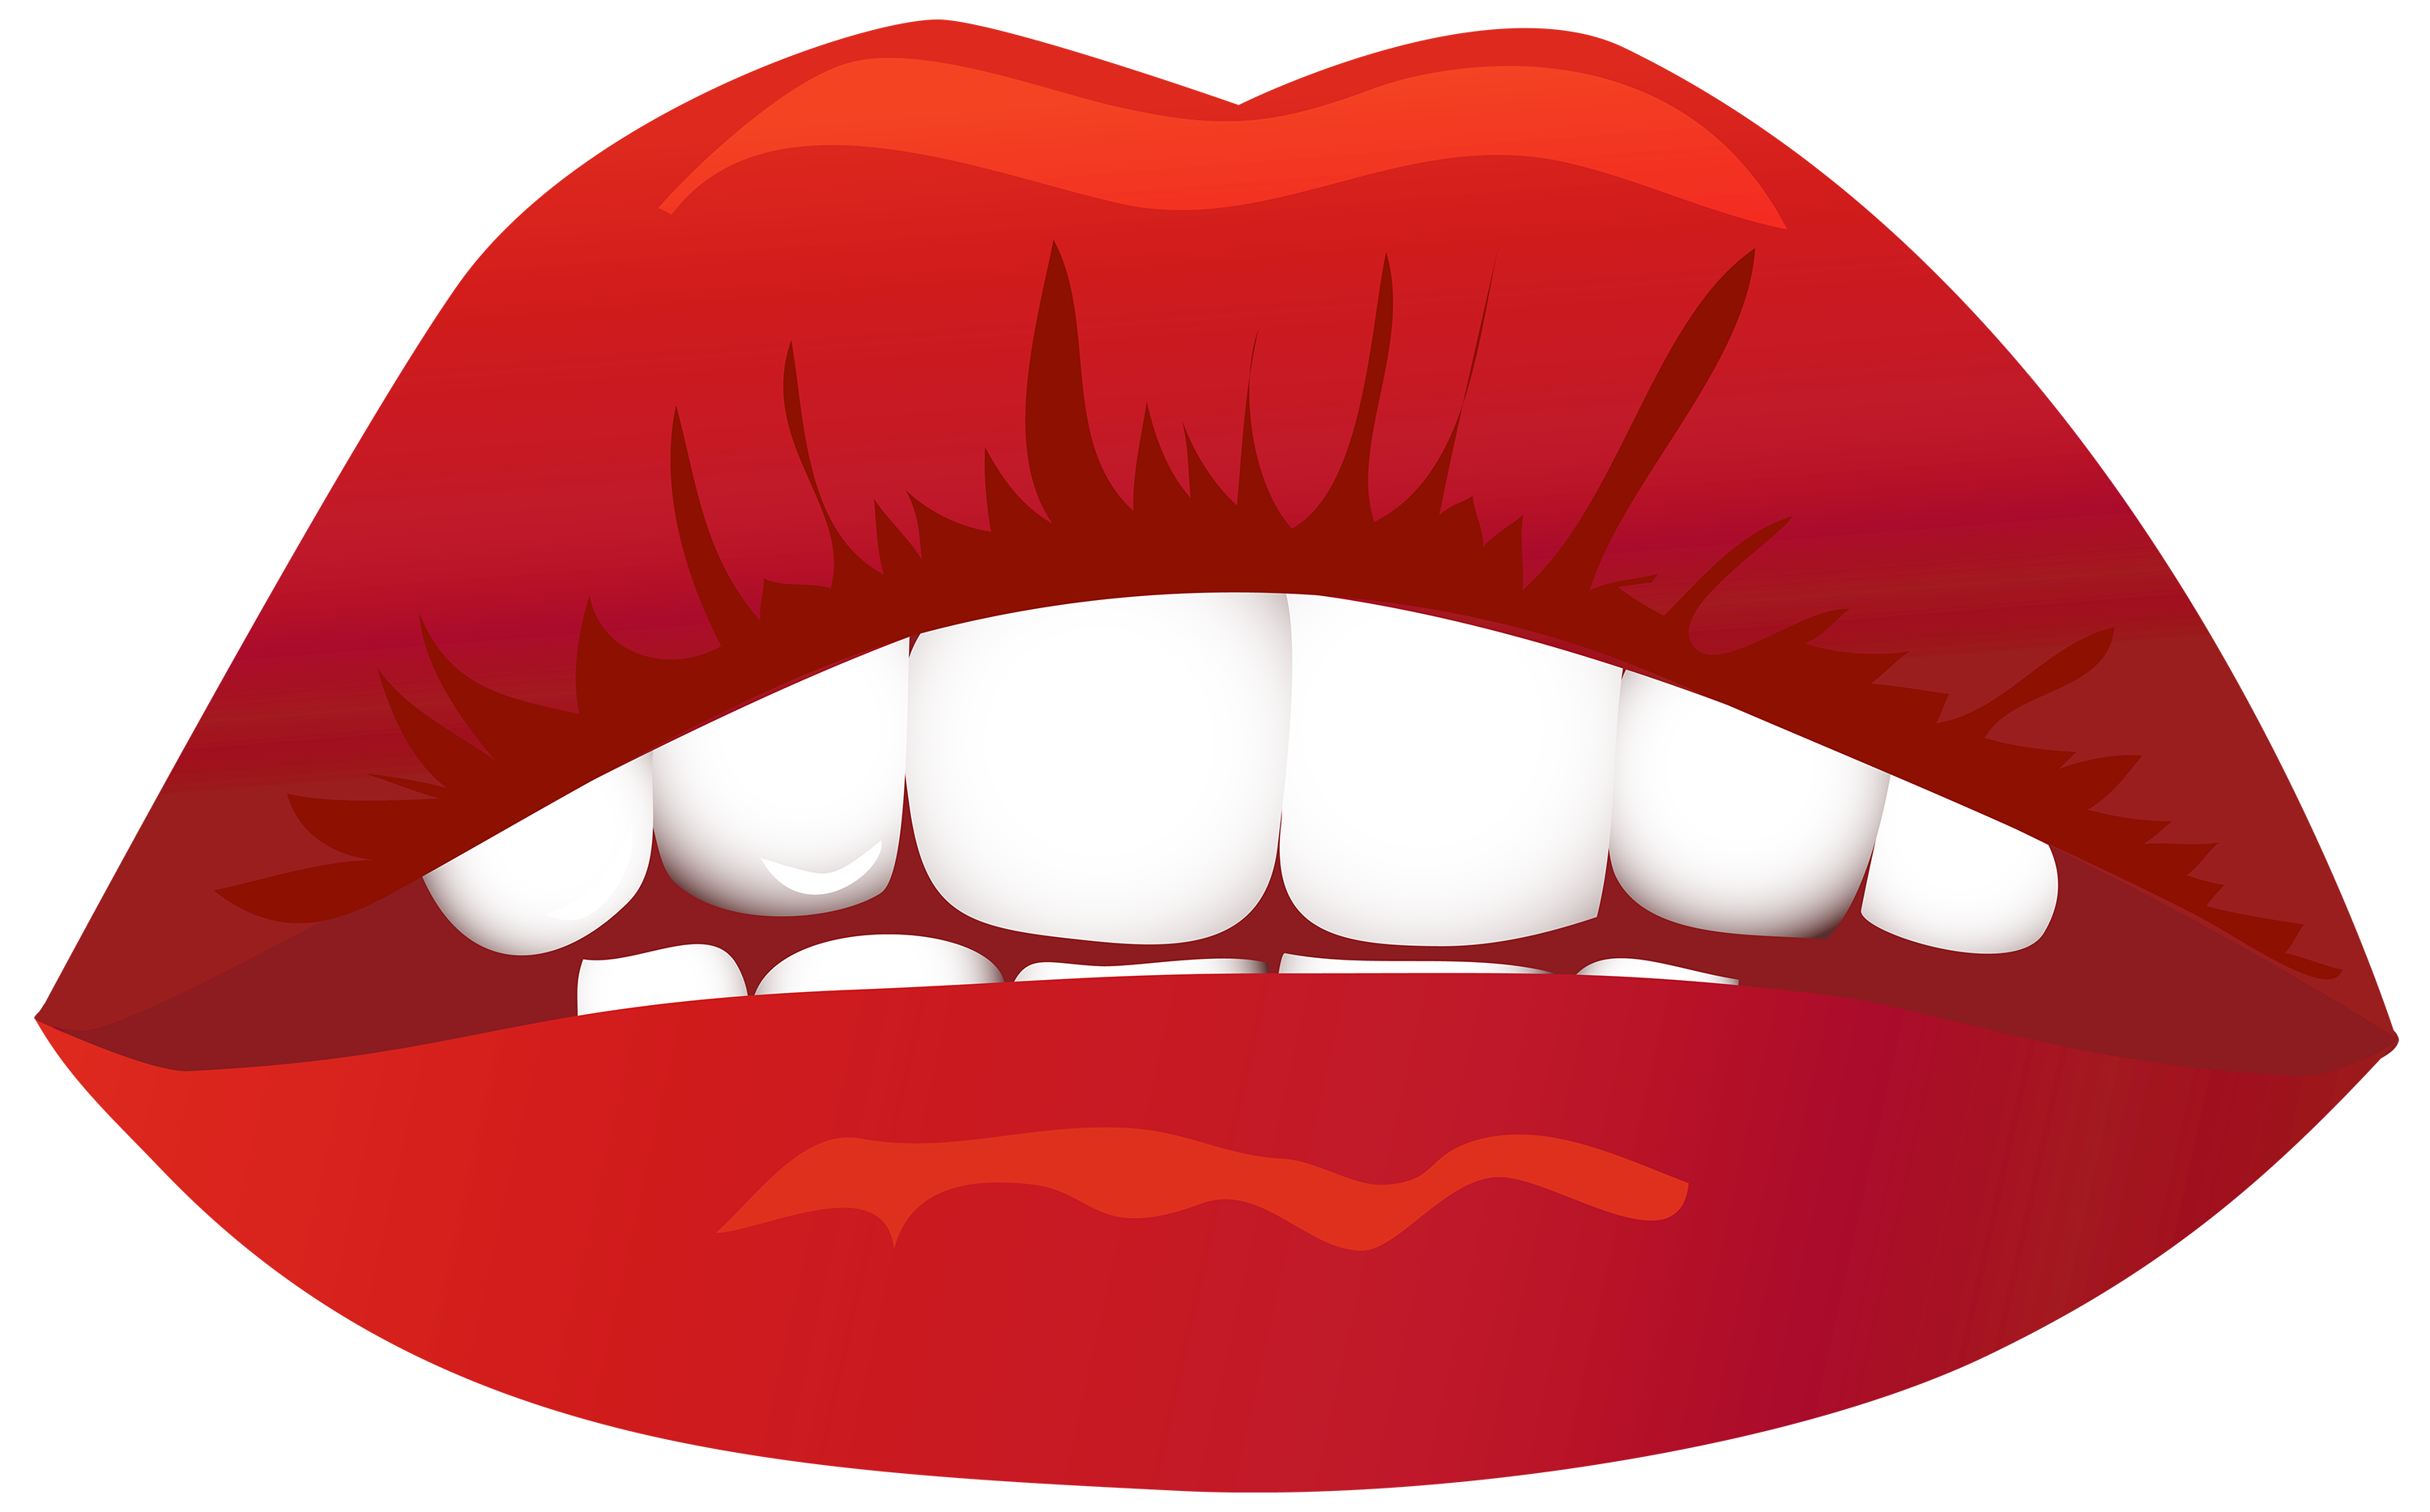 Classy red lips clipart - Cliparting.com